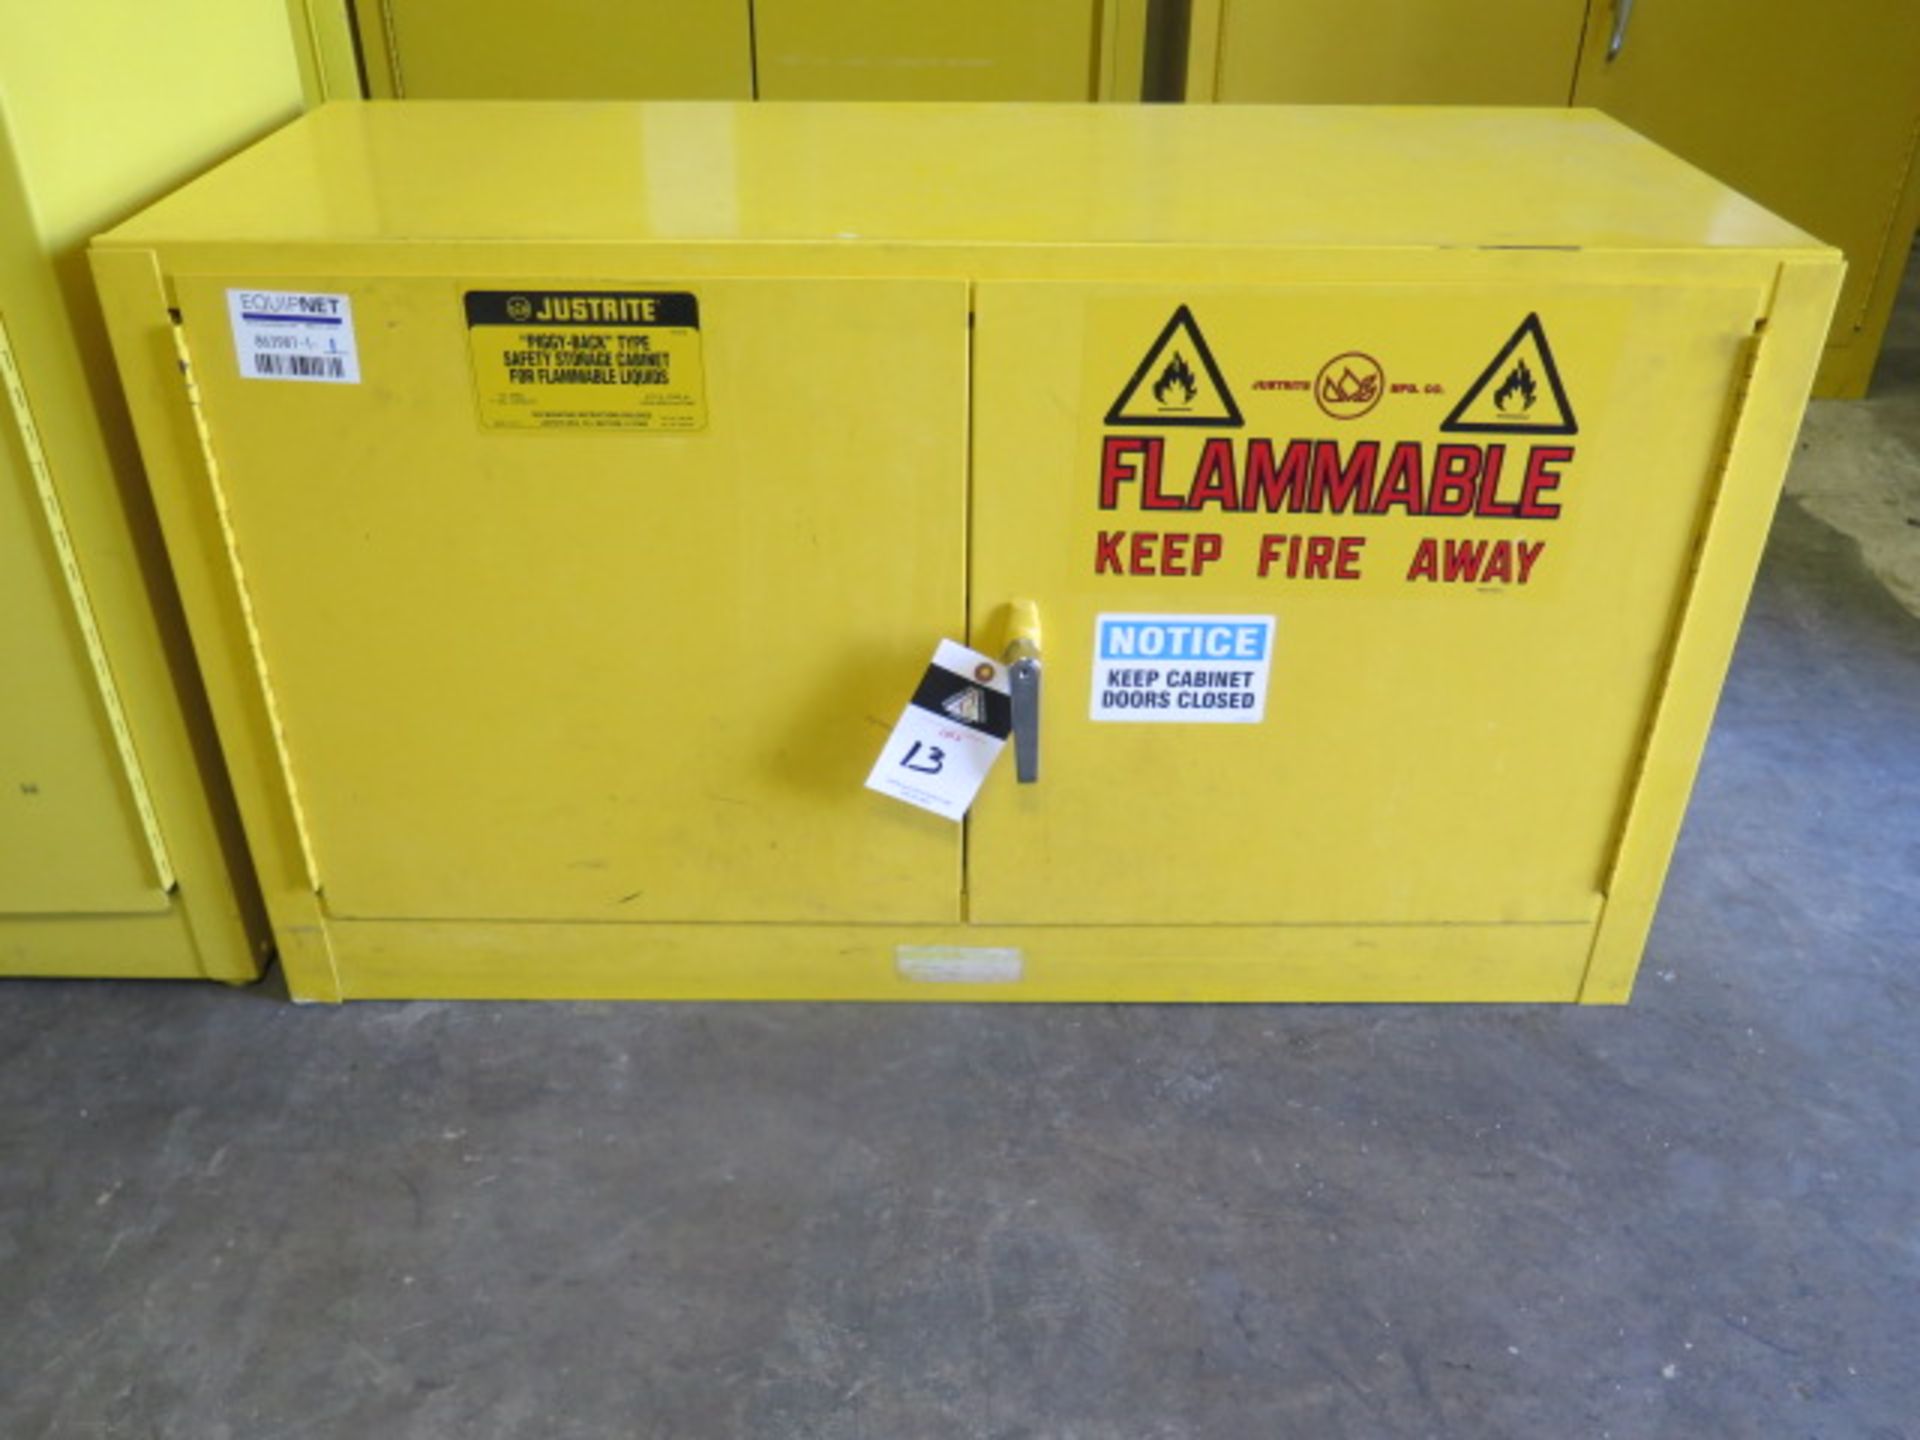 Justrite "Piggy-Back" Type Flammables Storage Cabinet (SOLD AS-IS - NO WARRANTY)